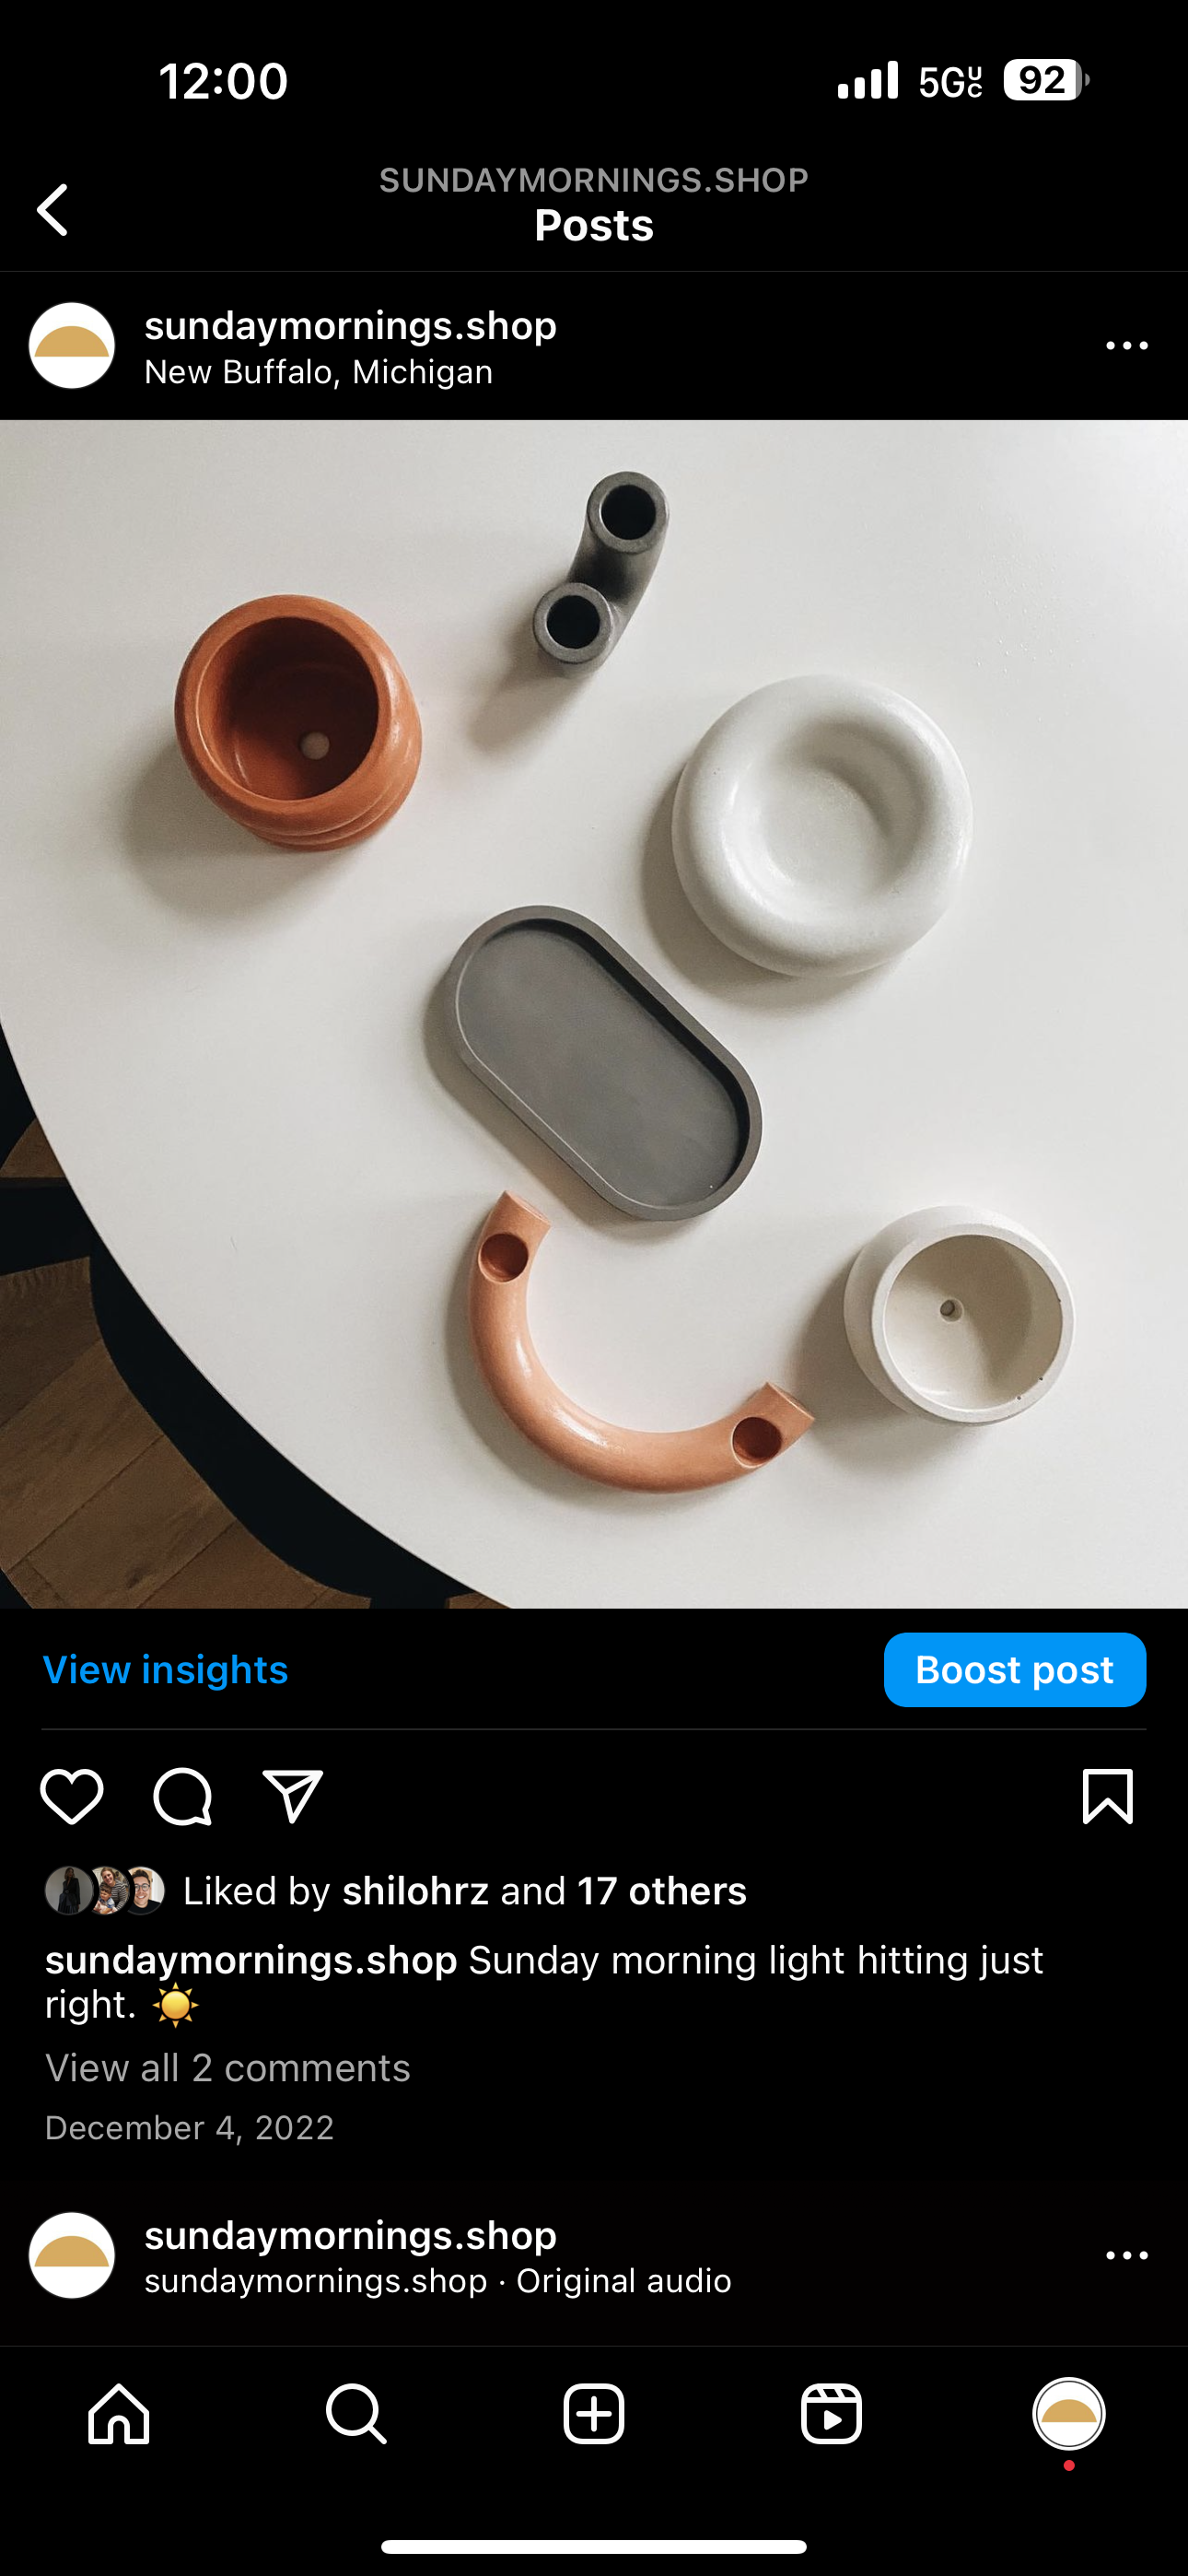 A screenshot of an Instagram post from pottery brand Sunday Mornings (@sundaymornings.shop). Sunday Mornings operates an Instagram Business account, so the post has a blue ‘View Insights’ button below the image. 